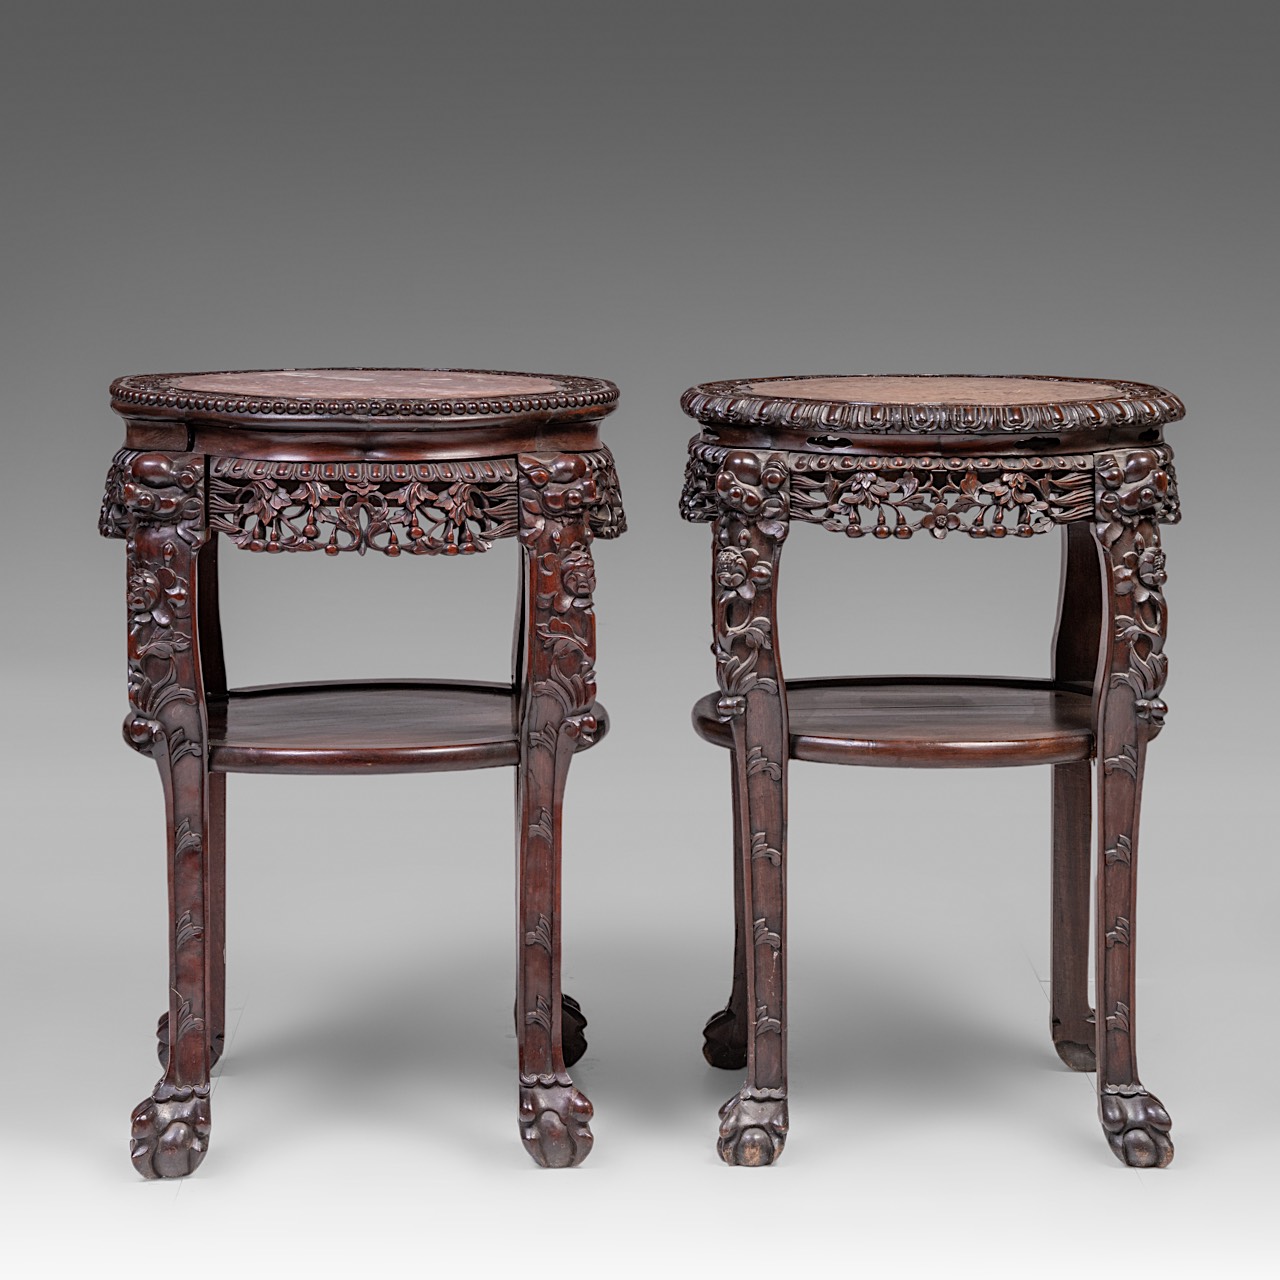 A small collection of four South Chinese carved hardwood bases, all with a marble top, late Qing, ta - Image 5 of 17